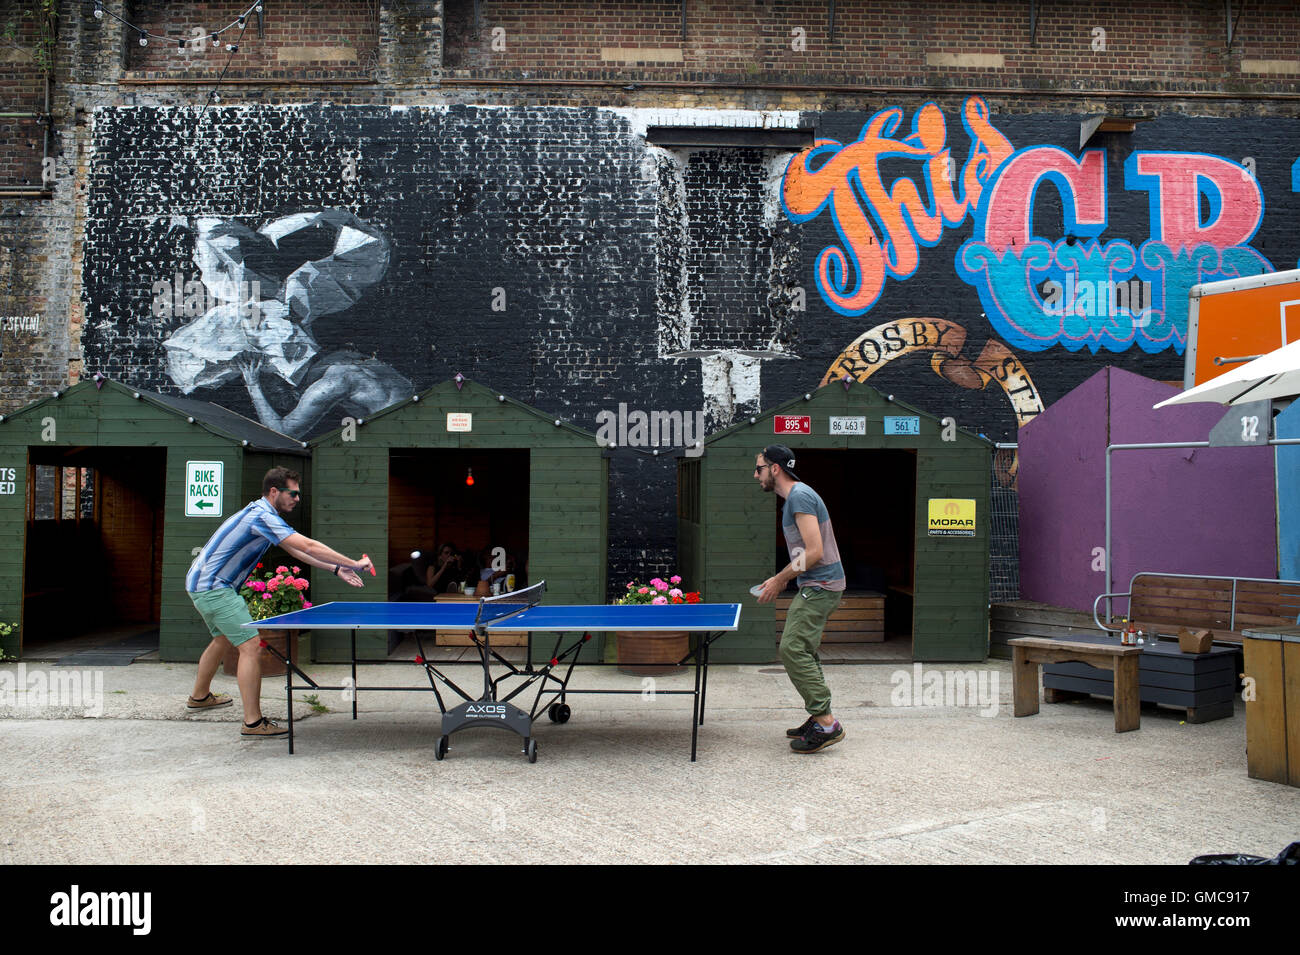 Hackney Wick. Two young men play table tennis. Stock Photo